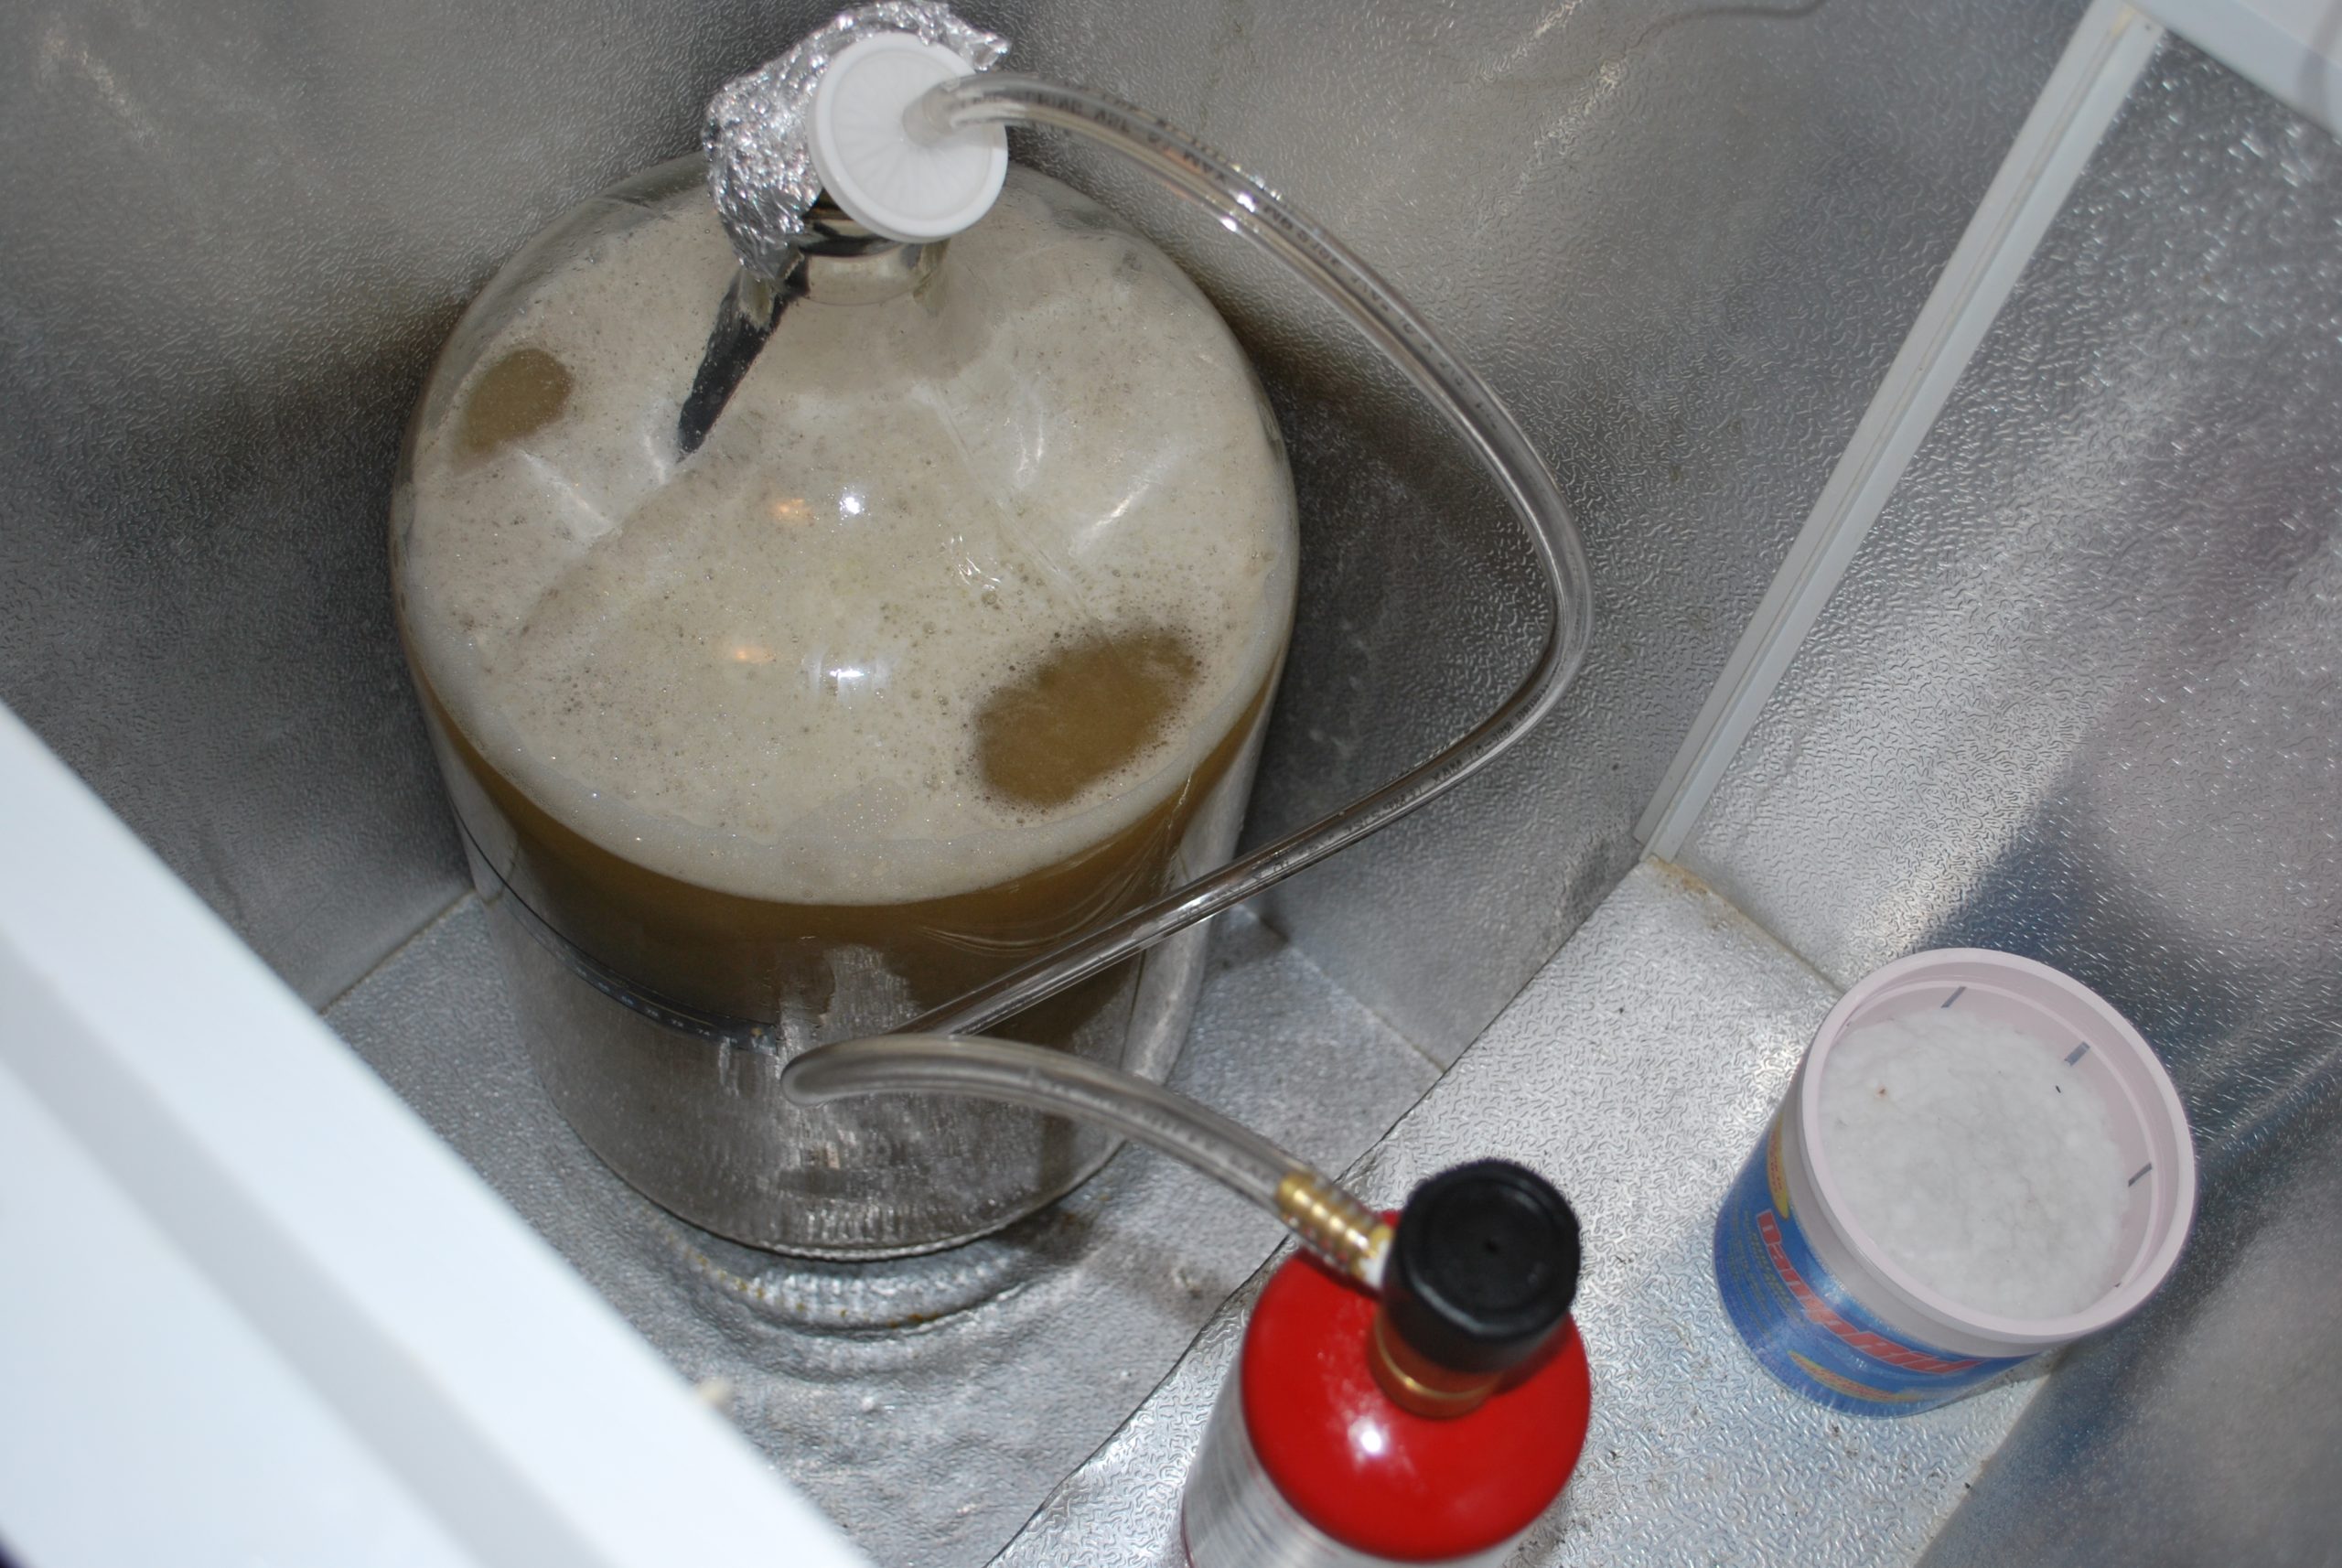 13 Homebrew Recipes To Make Beer At Home